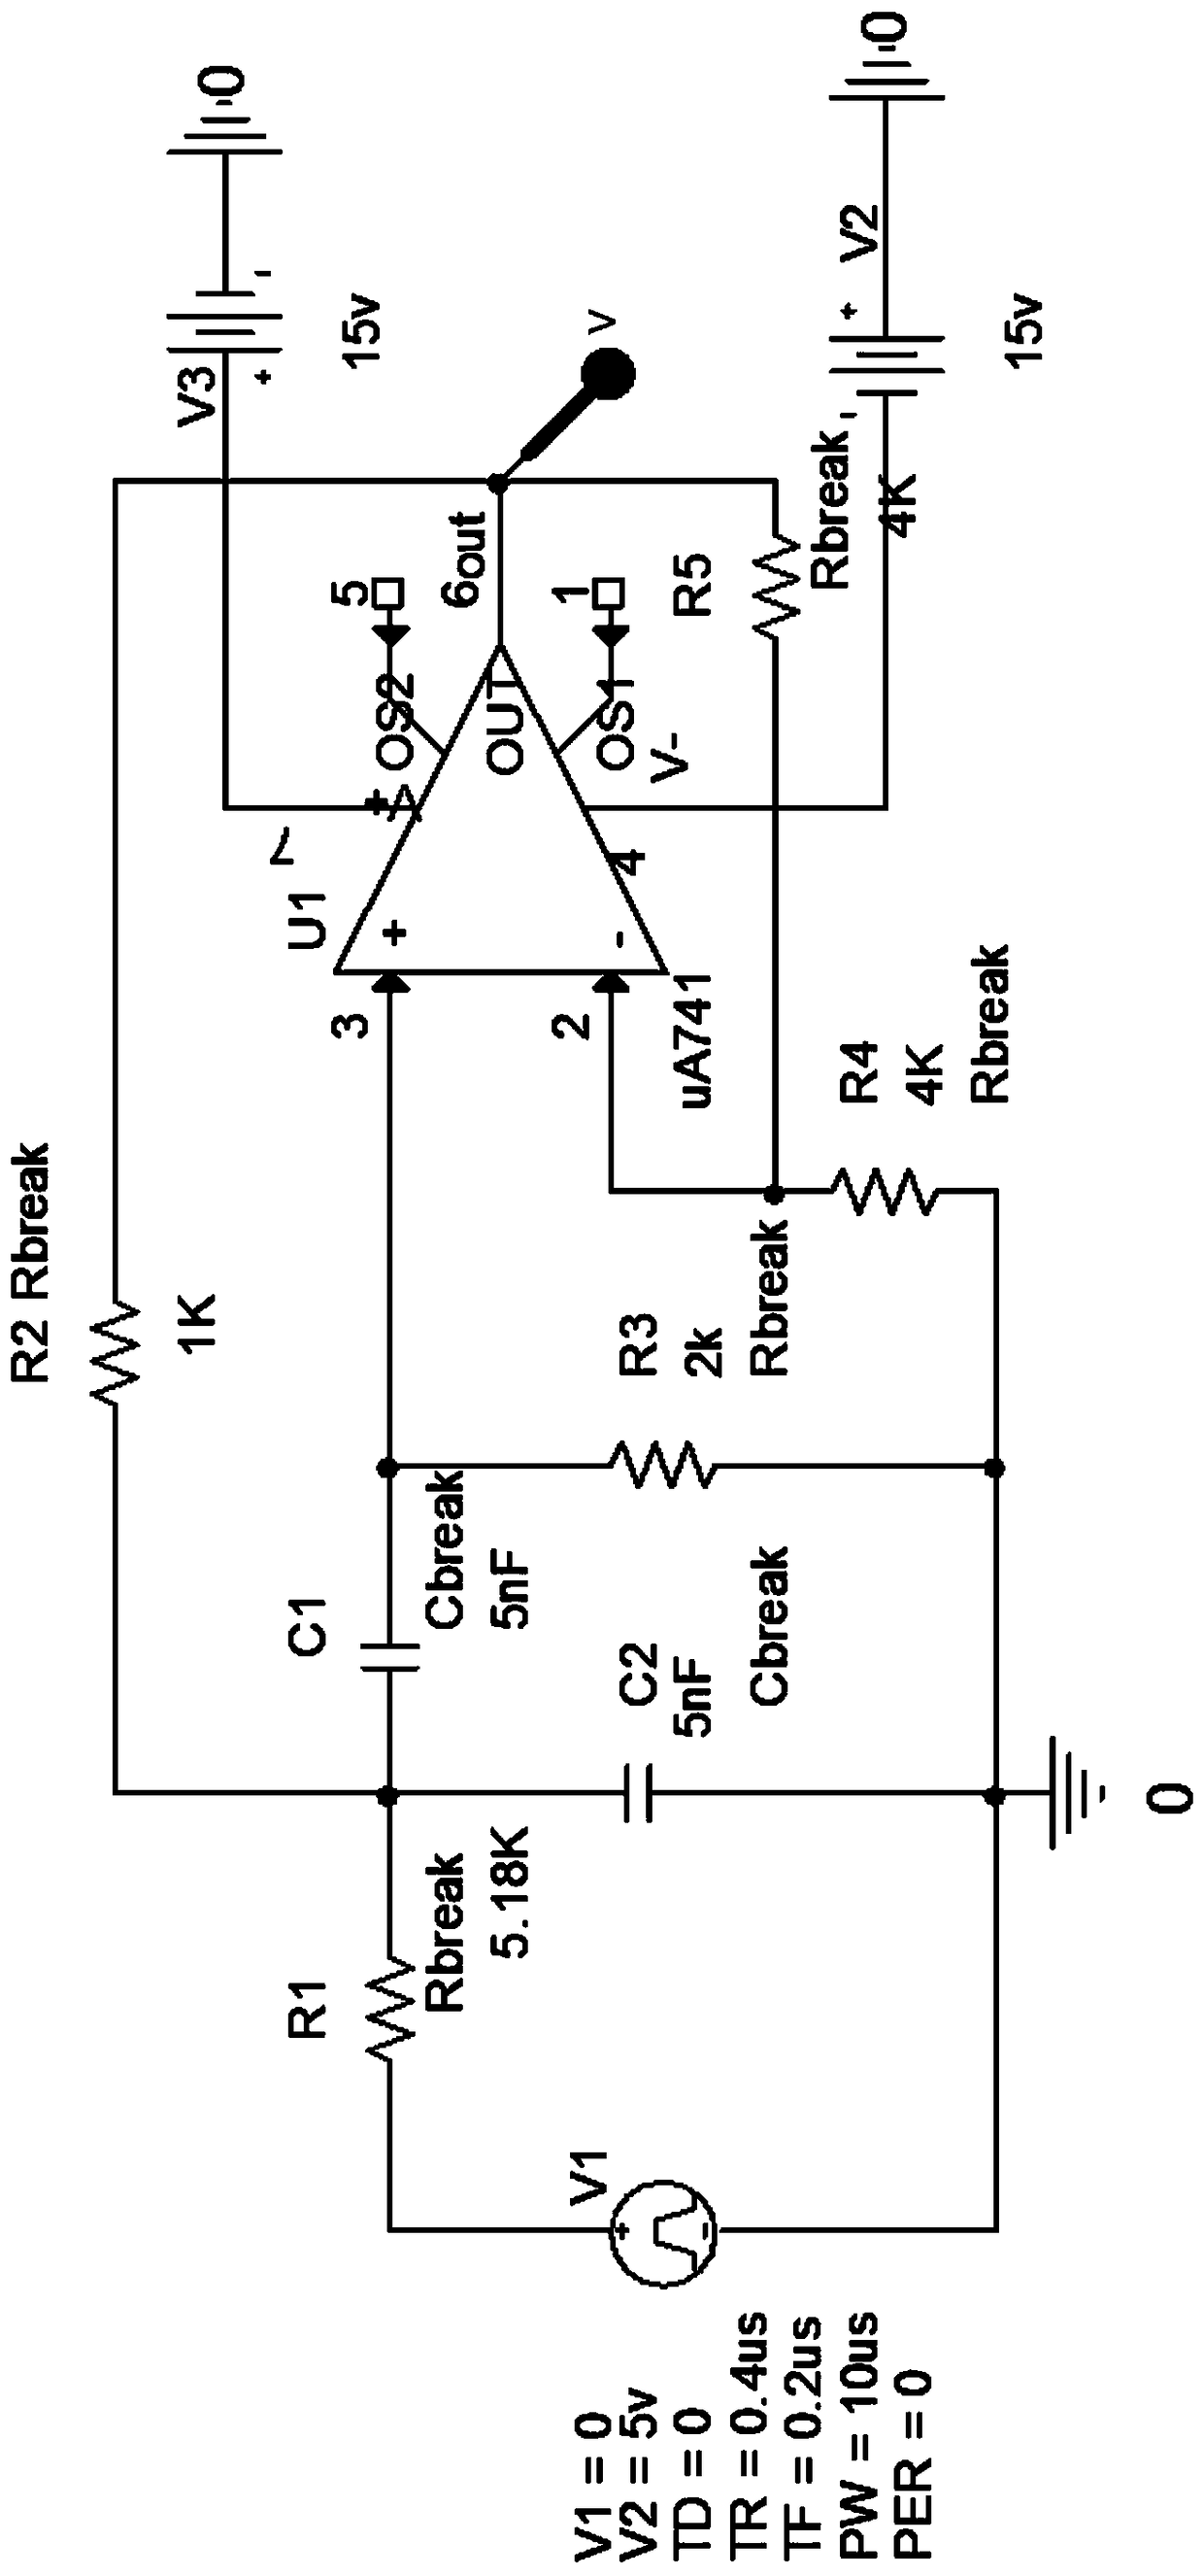 Analog circuit fault feature extraction method based on cloud correlation coefficient matrix